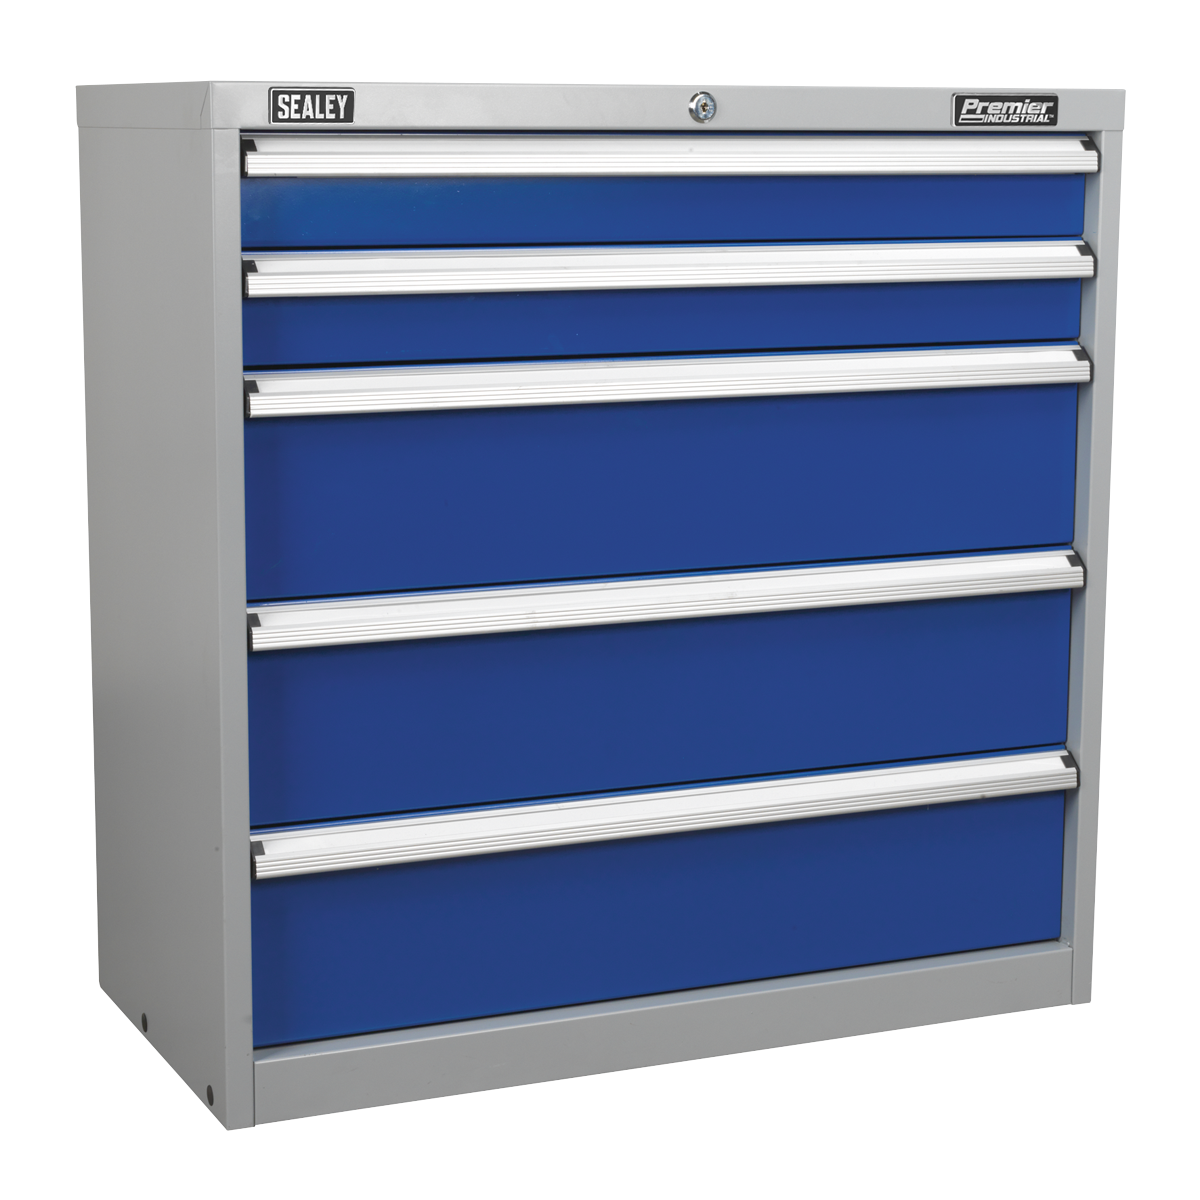 Sealey Industrial Cabinet 5 Drawer API9005